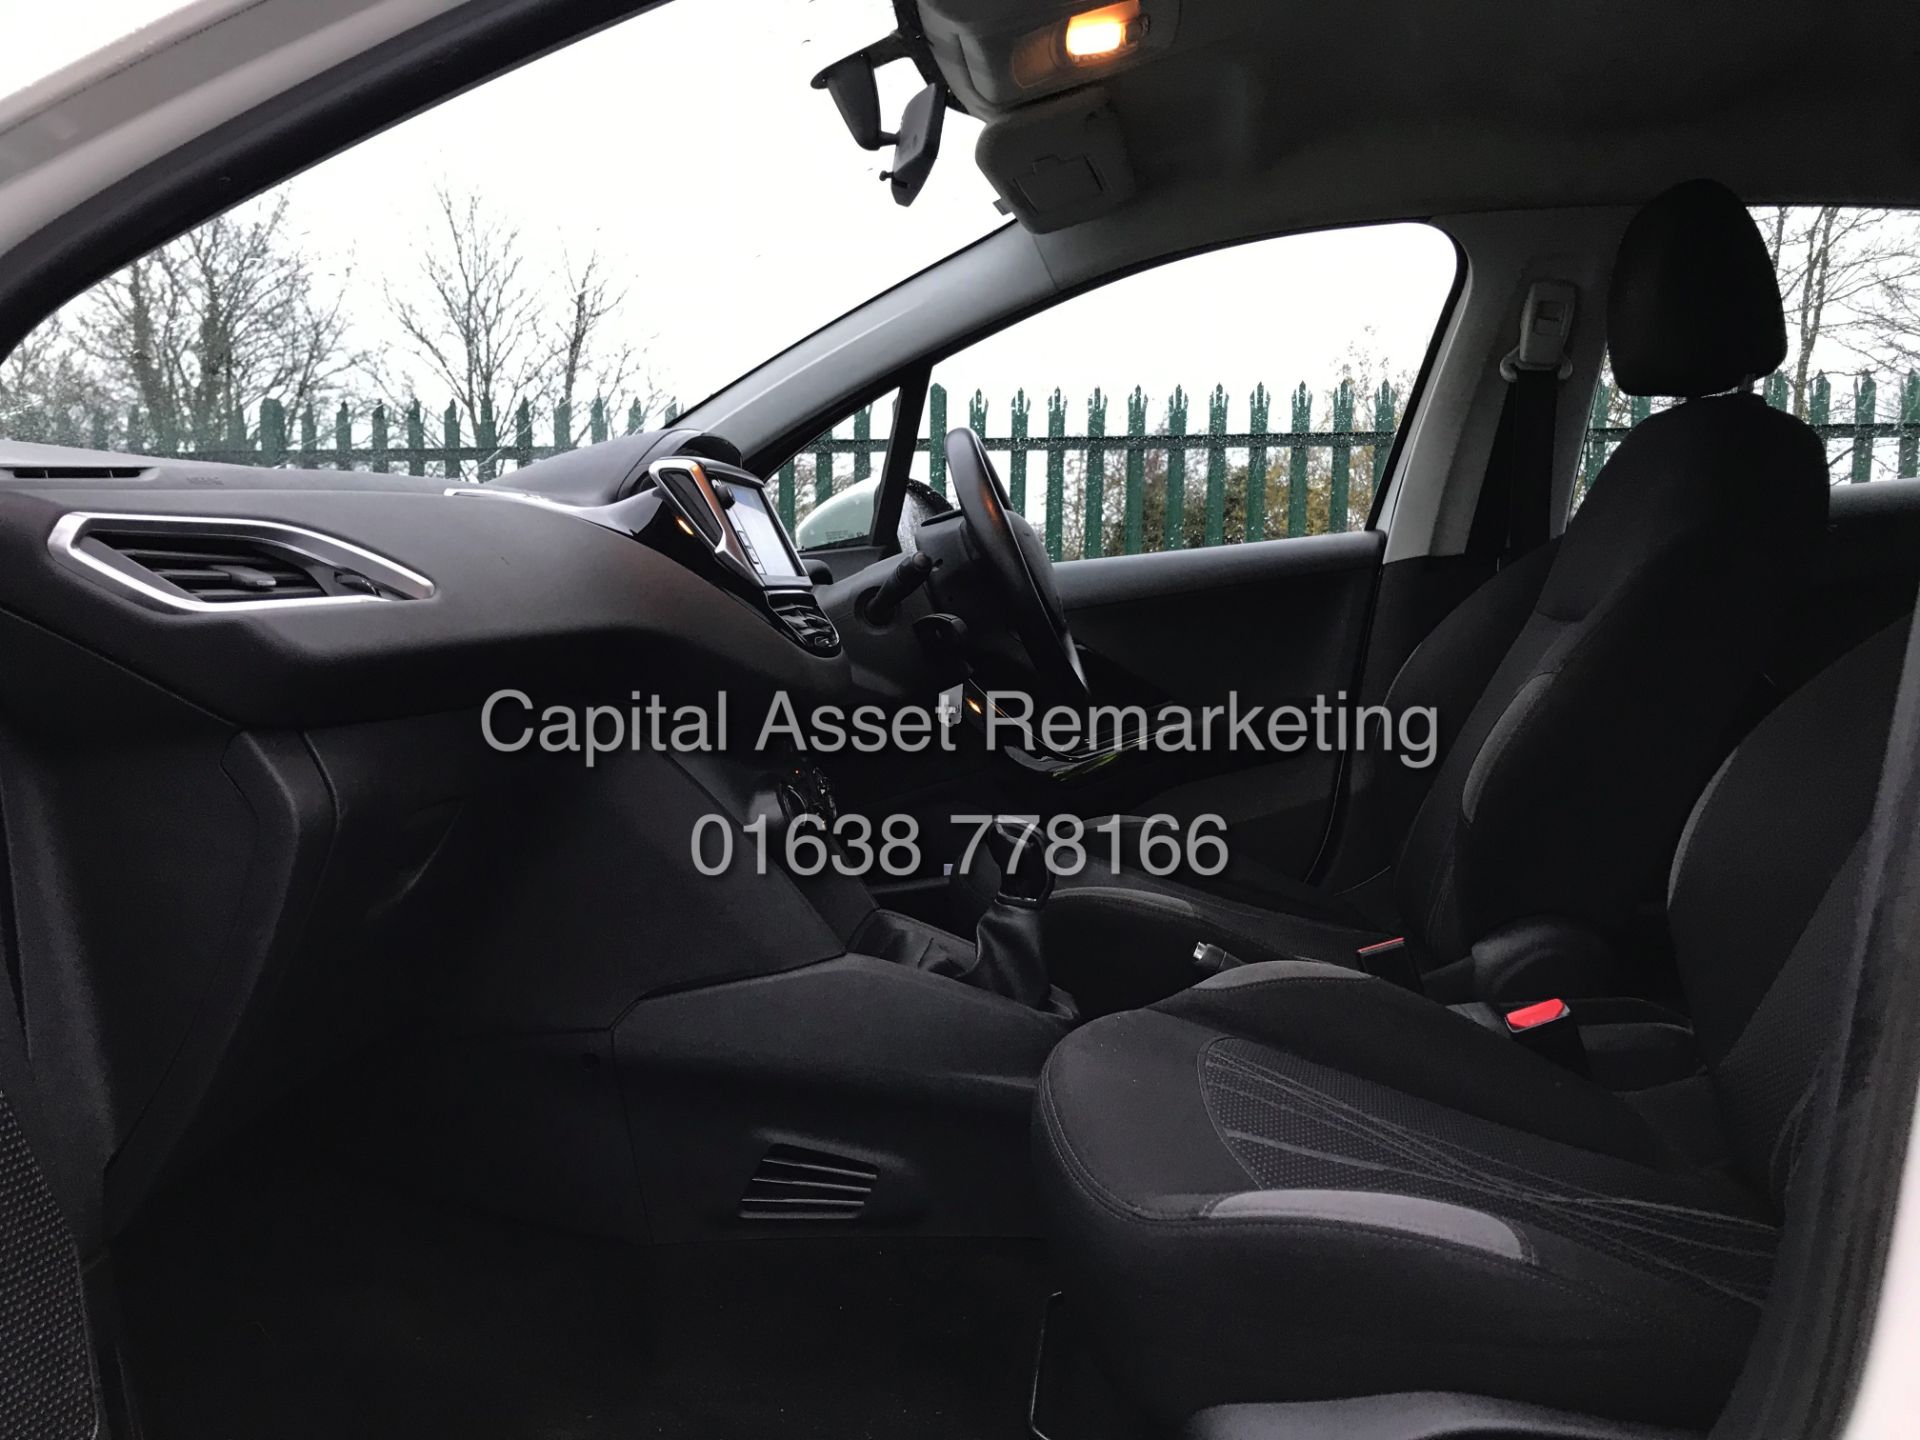 (ON SALE) PEUGEOT 208 1.4HDI "ACTIVE" 1 PREVIOUS KEEPER FSH (14 REG) RECENT SERVICE-AIR CON *NO VAT* - Image 13 of 23